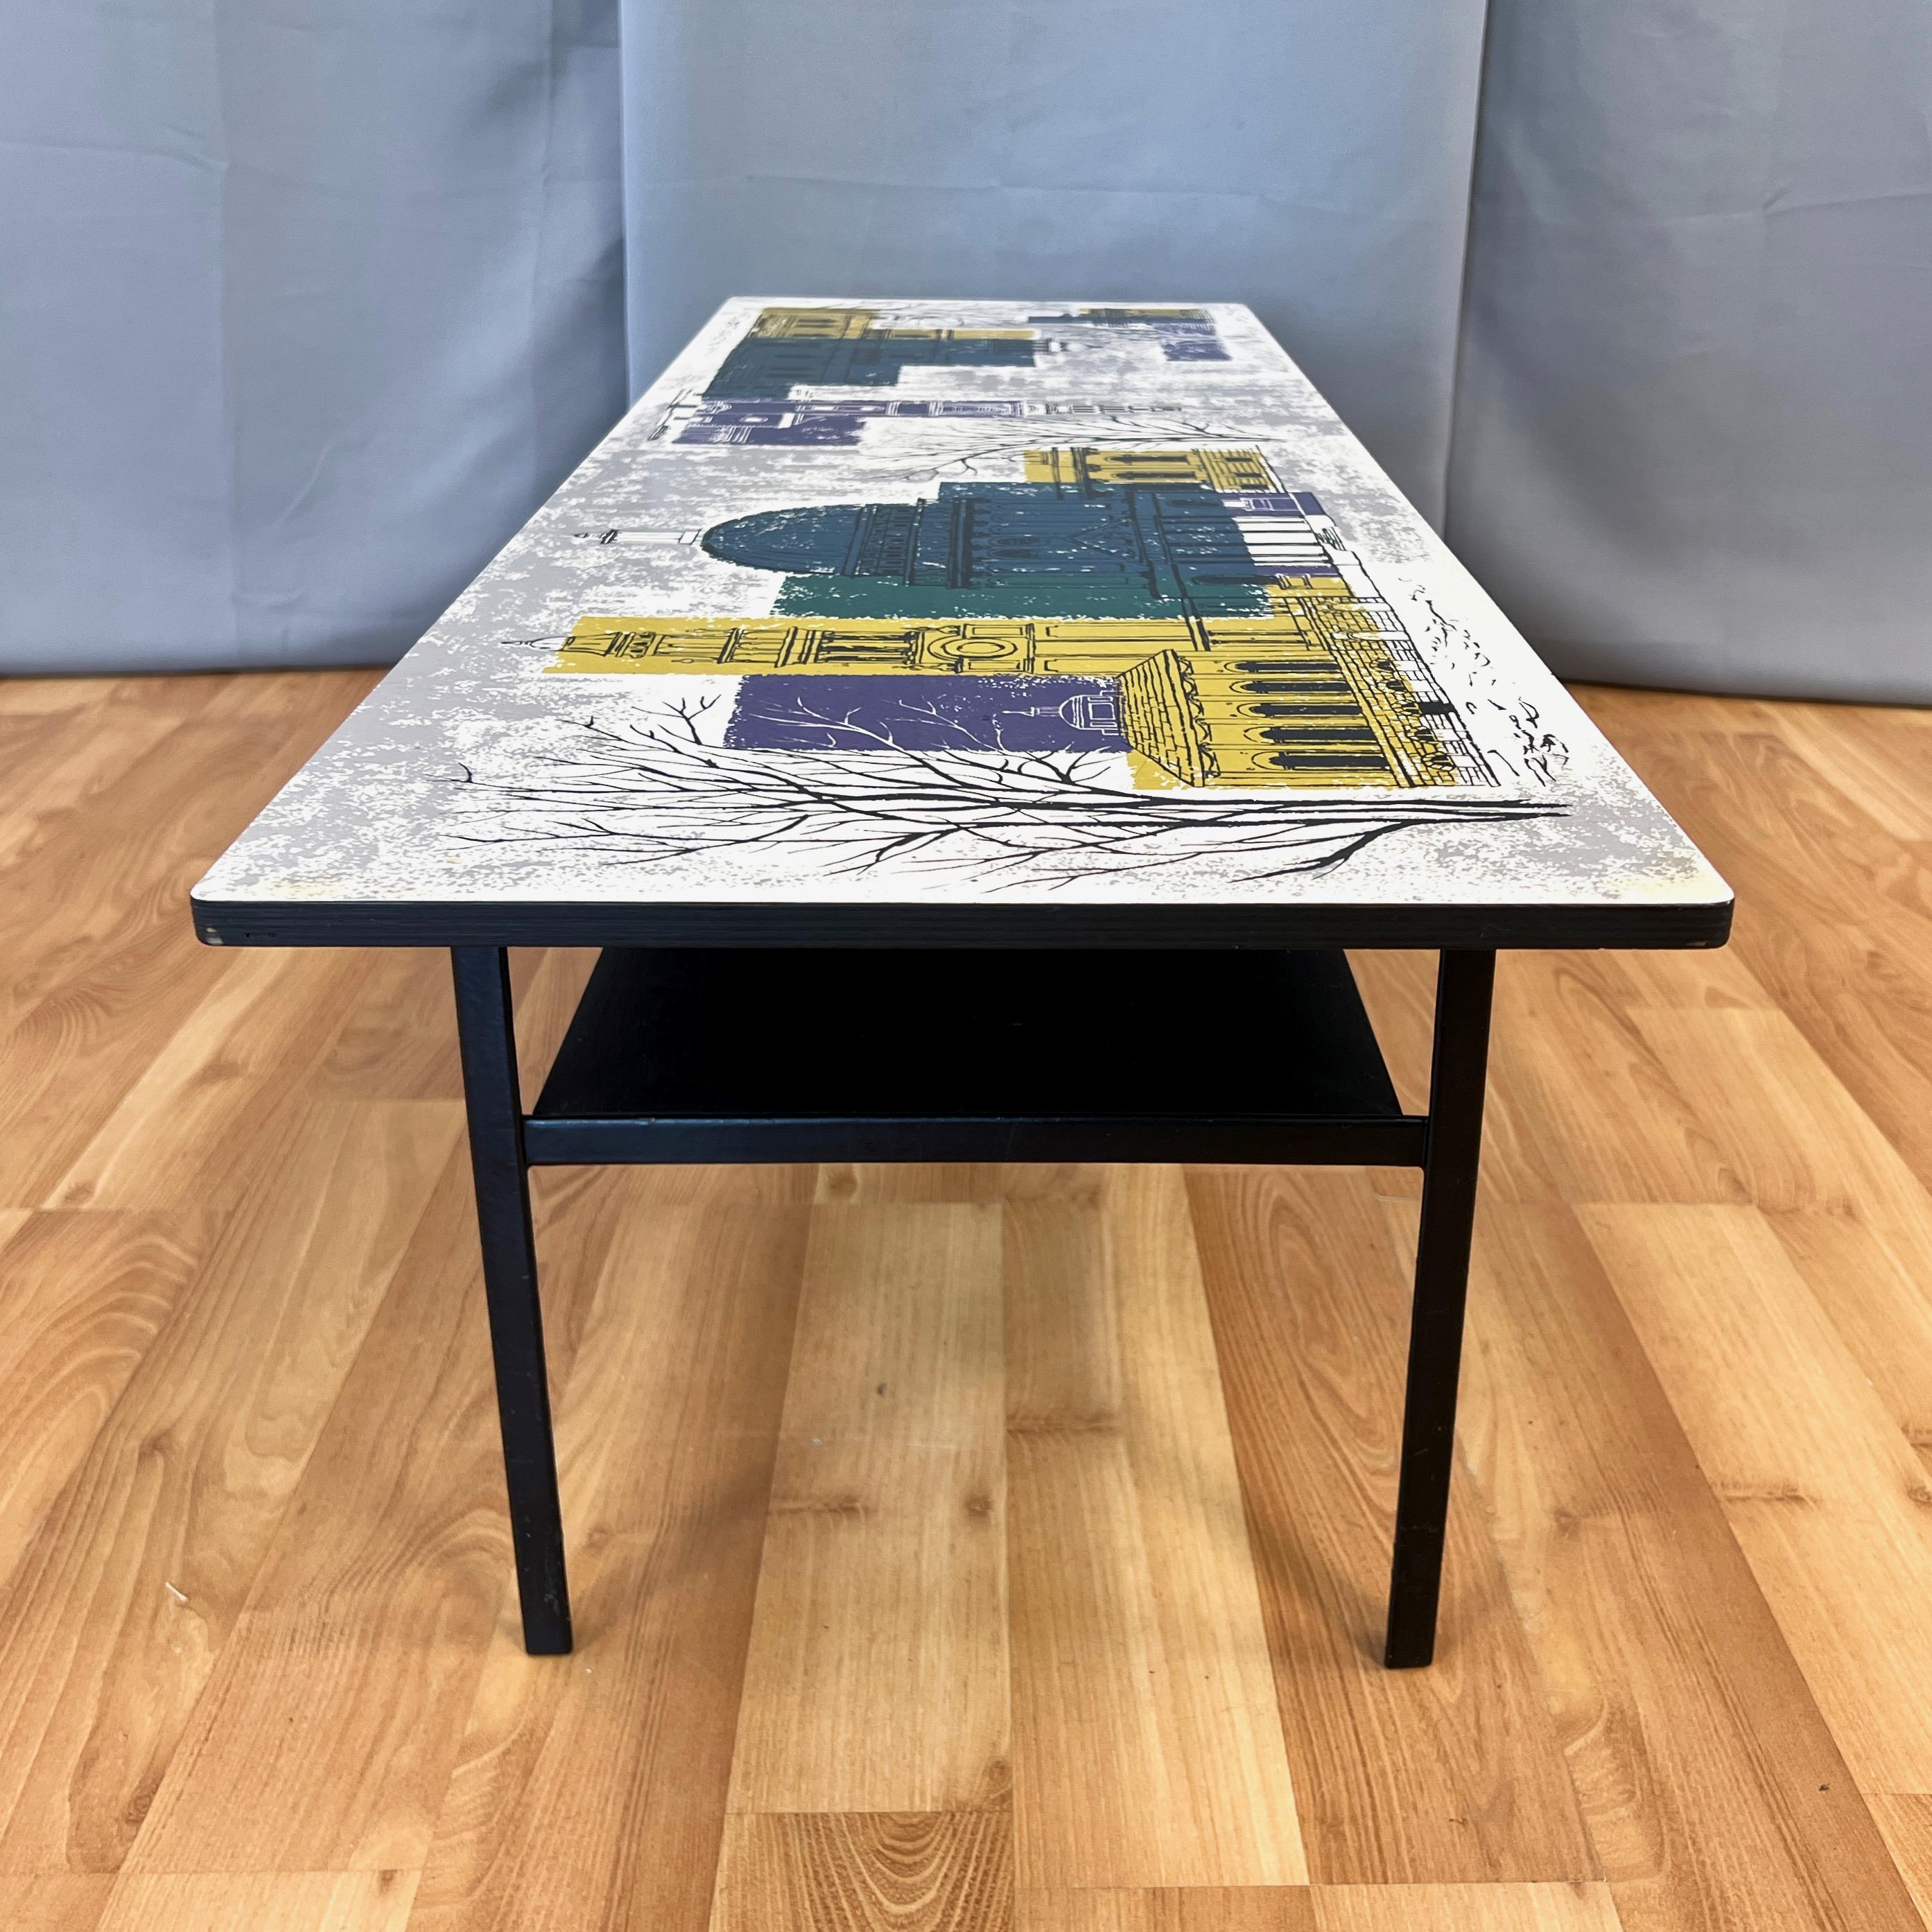 John Piper London Skyline Coffee Table by Myer for Conran and Heal’s, c. 1960 For Sale 5